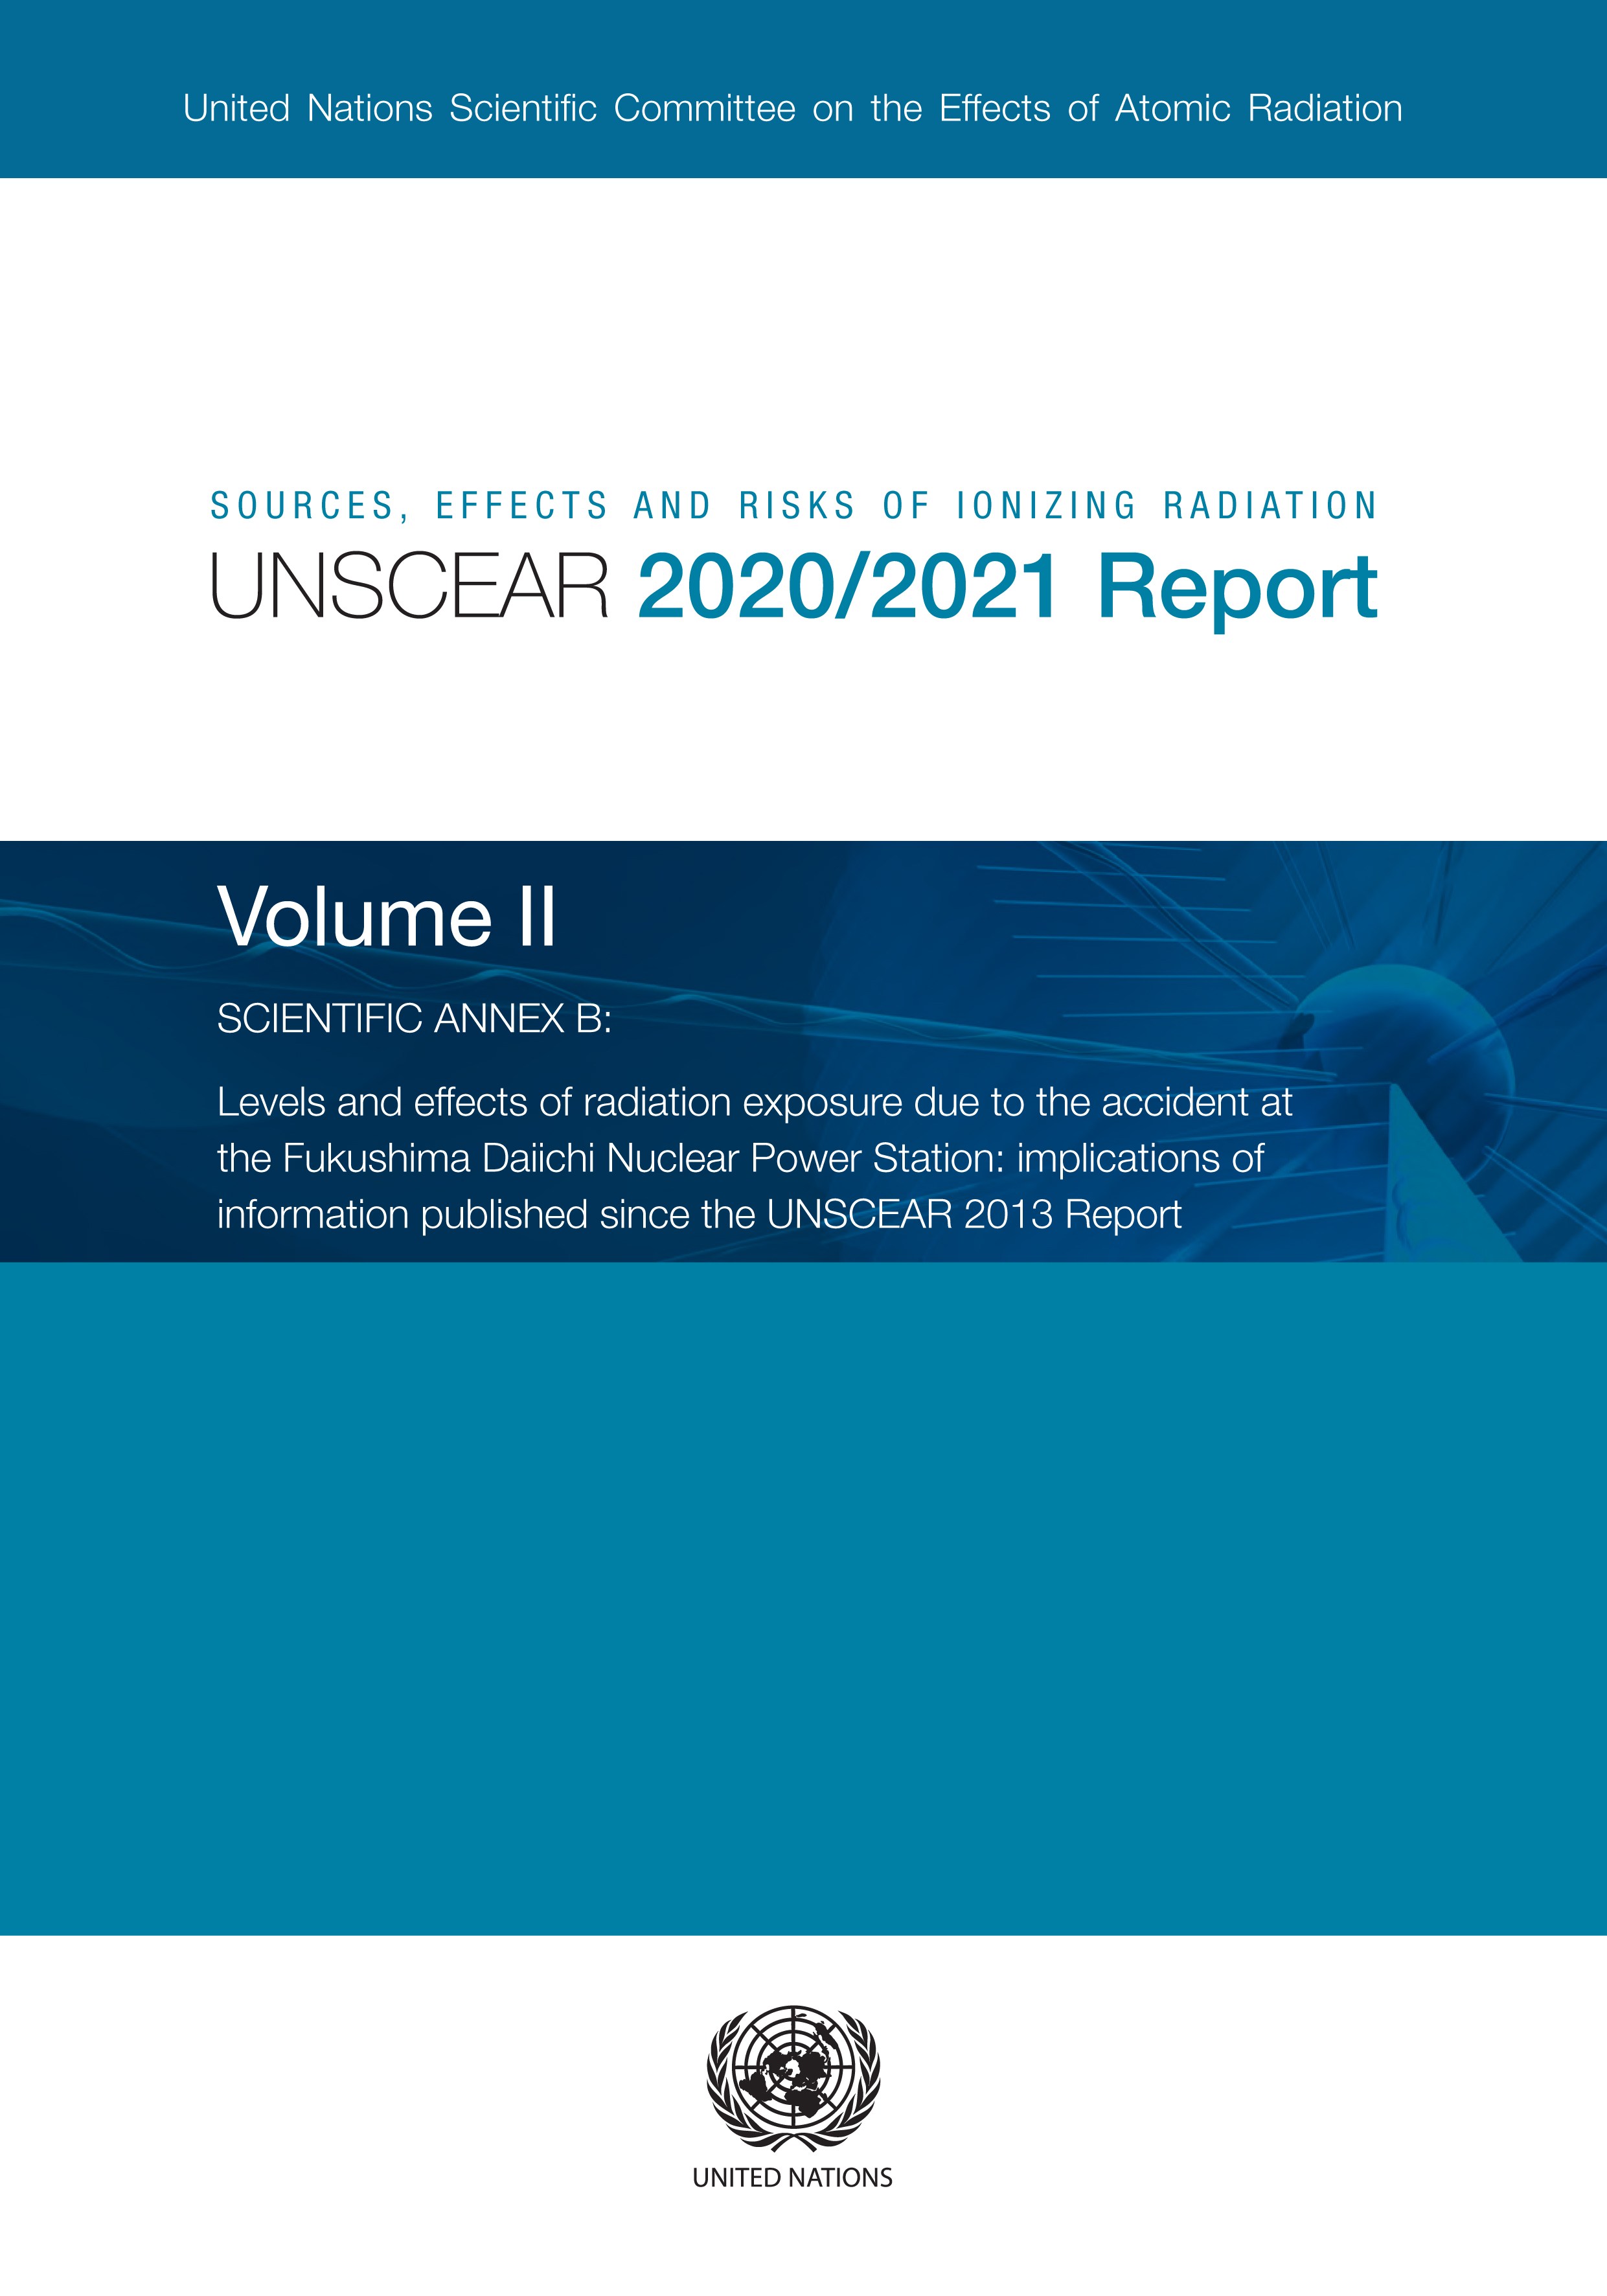 image of Sources, Effects and Risks of Ionizing Radiation, United Nations Scientific Committee on the Effects of Atomic Radiation (UNSCEAR) 2020/2021 Report, Volume II